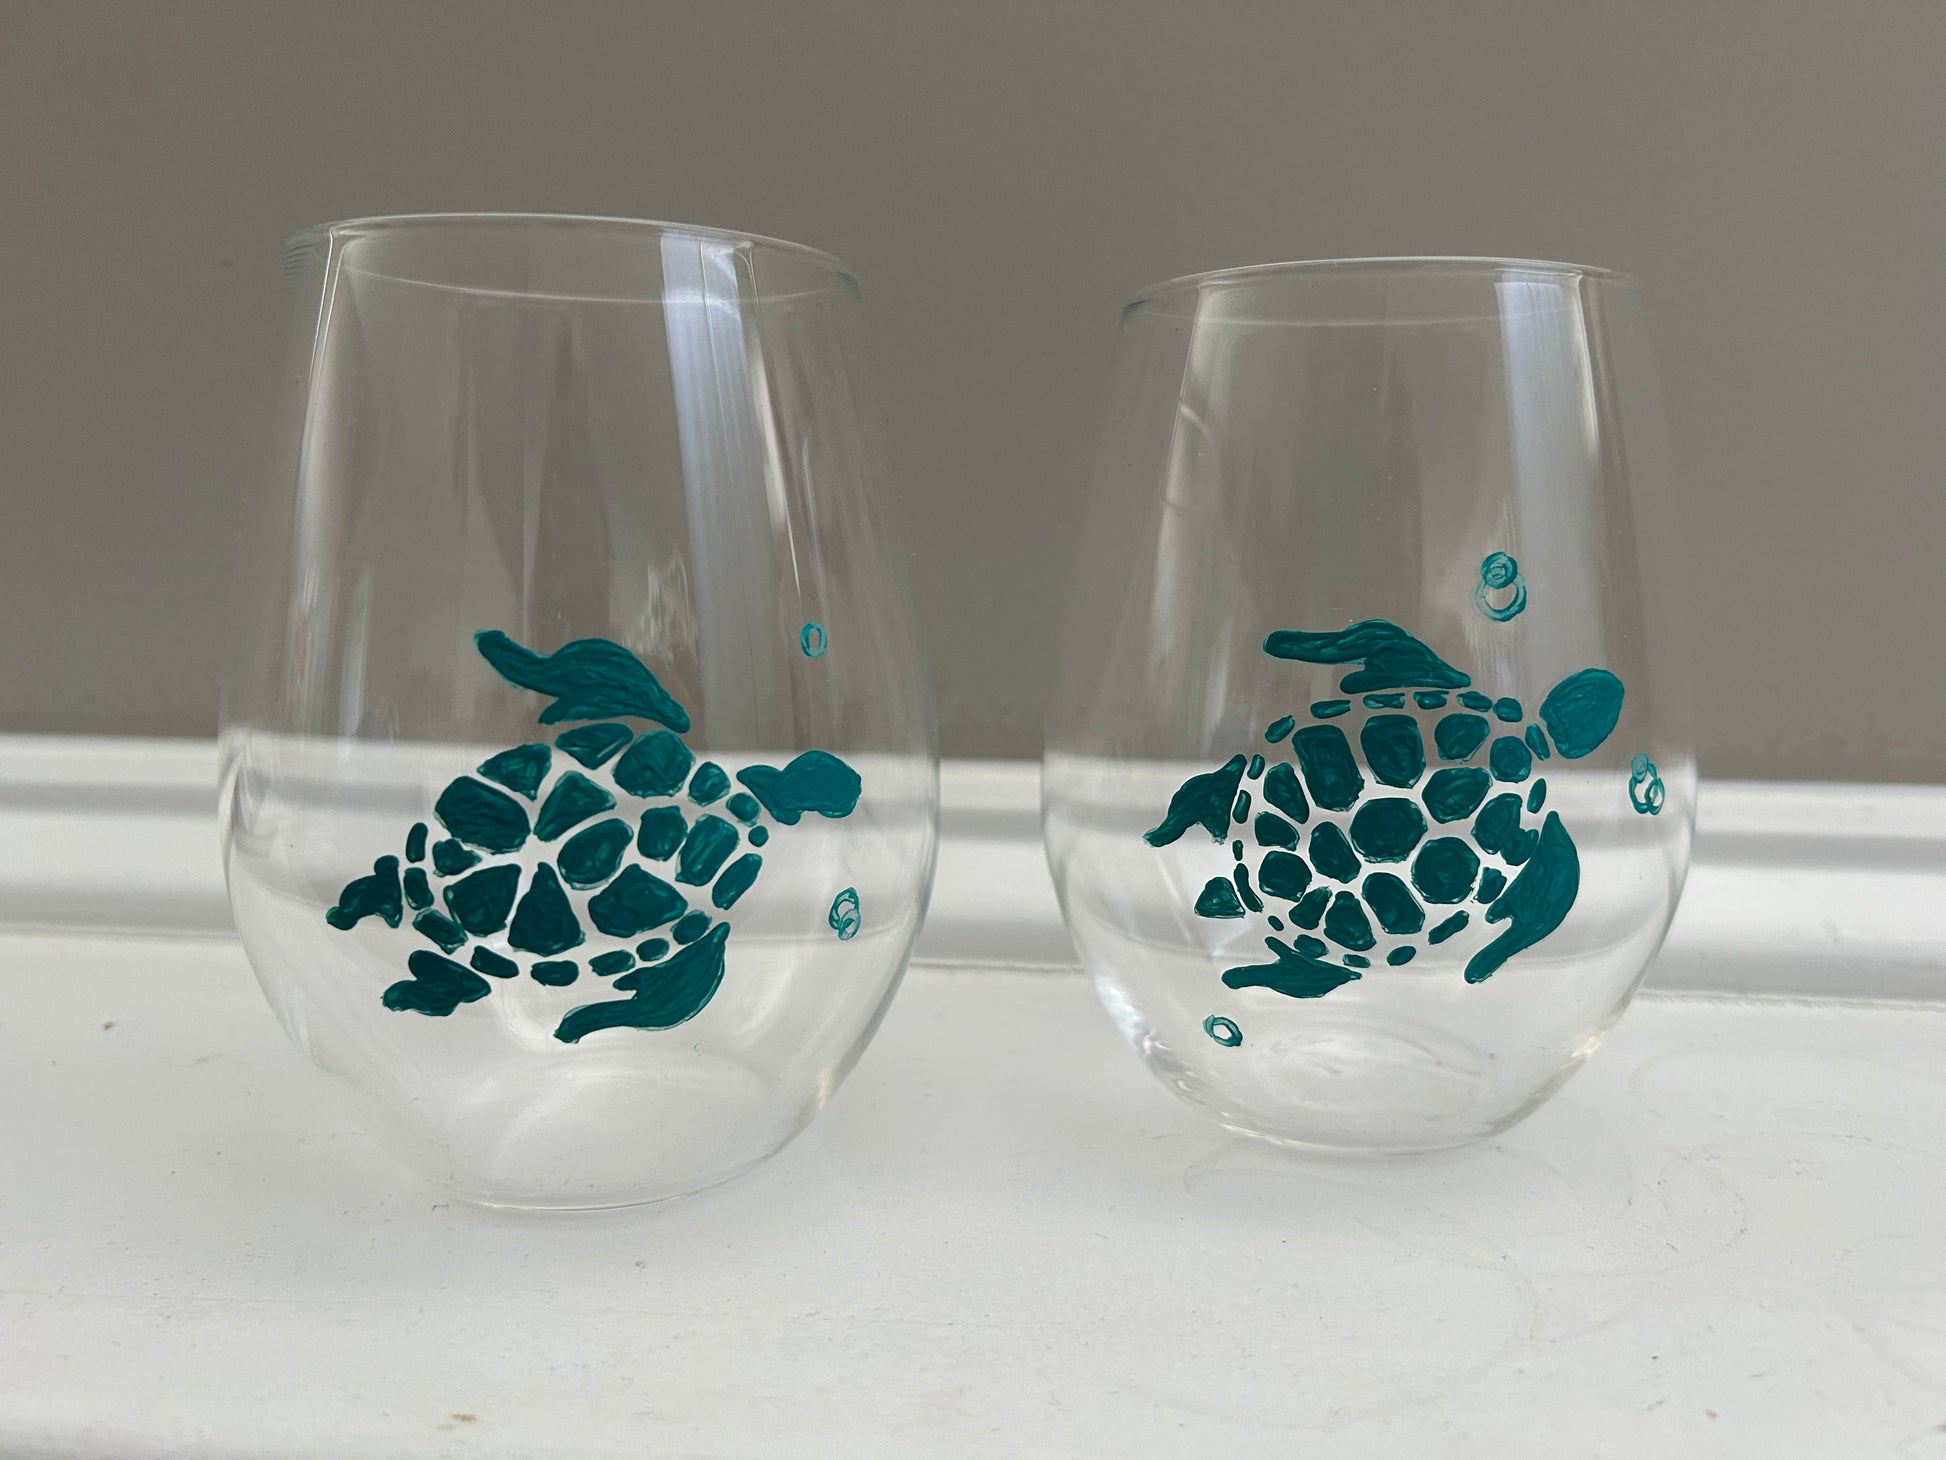 Hand-painted stemless wine glasses painted with teal sea turtles